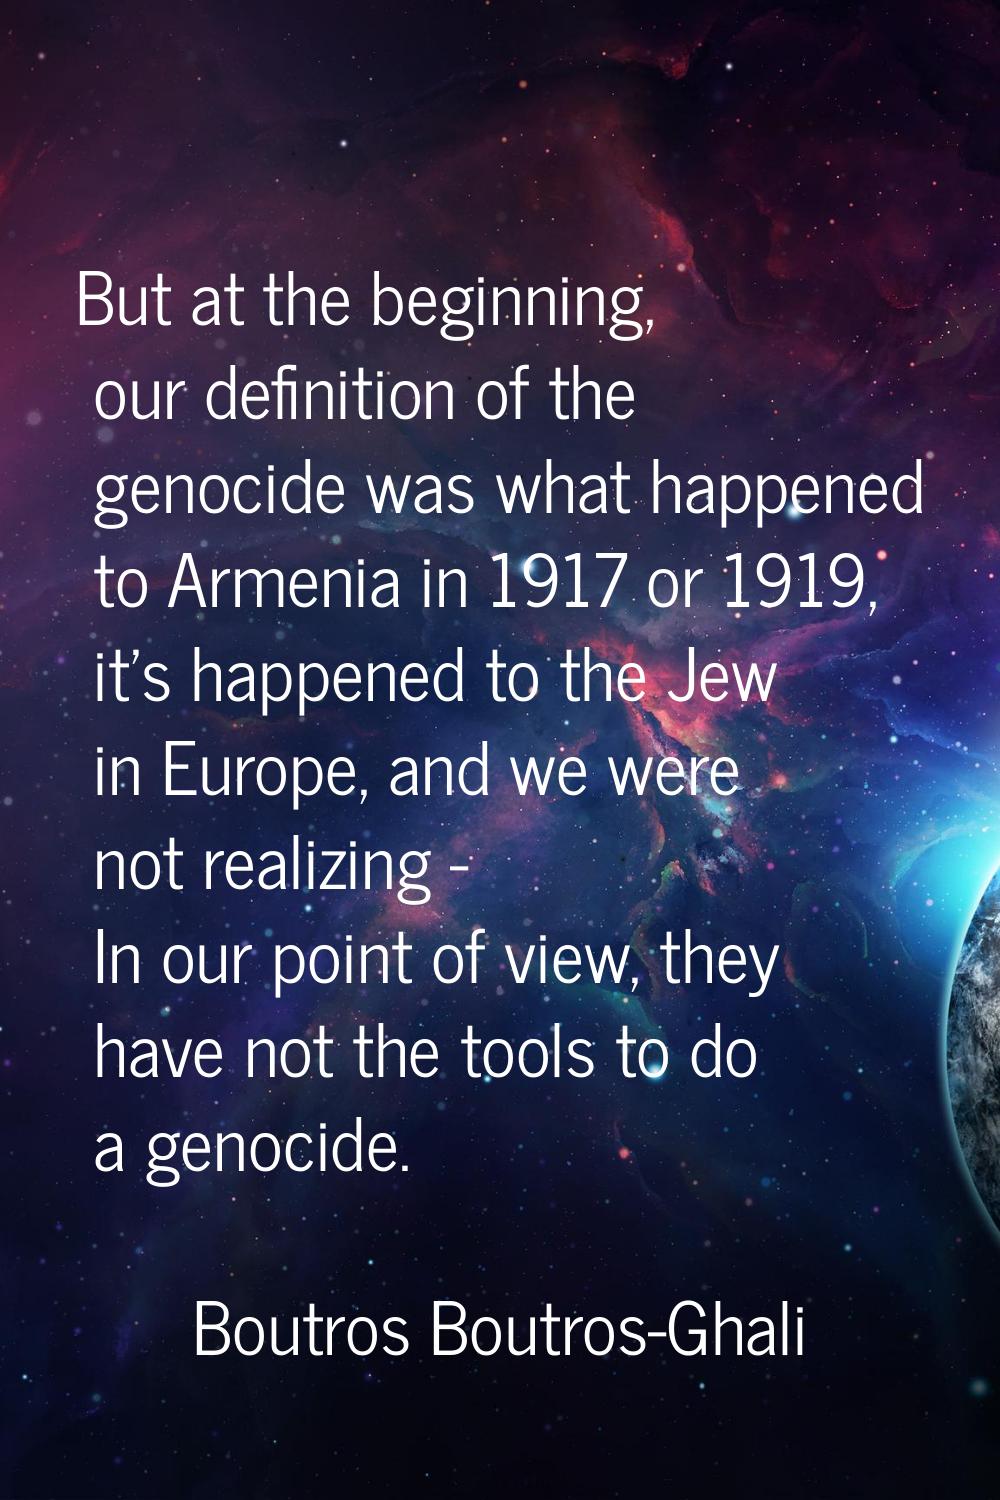 But at the beginning, our definition of the genocide was what happened to Armenia in 1917 or 1919, 